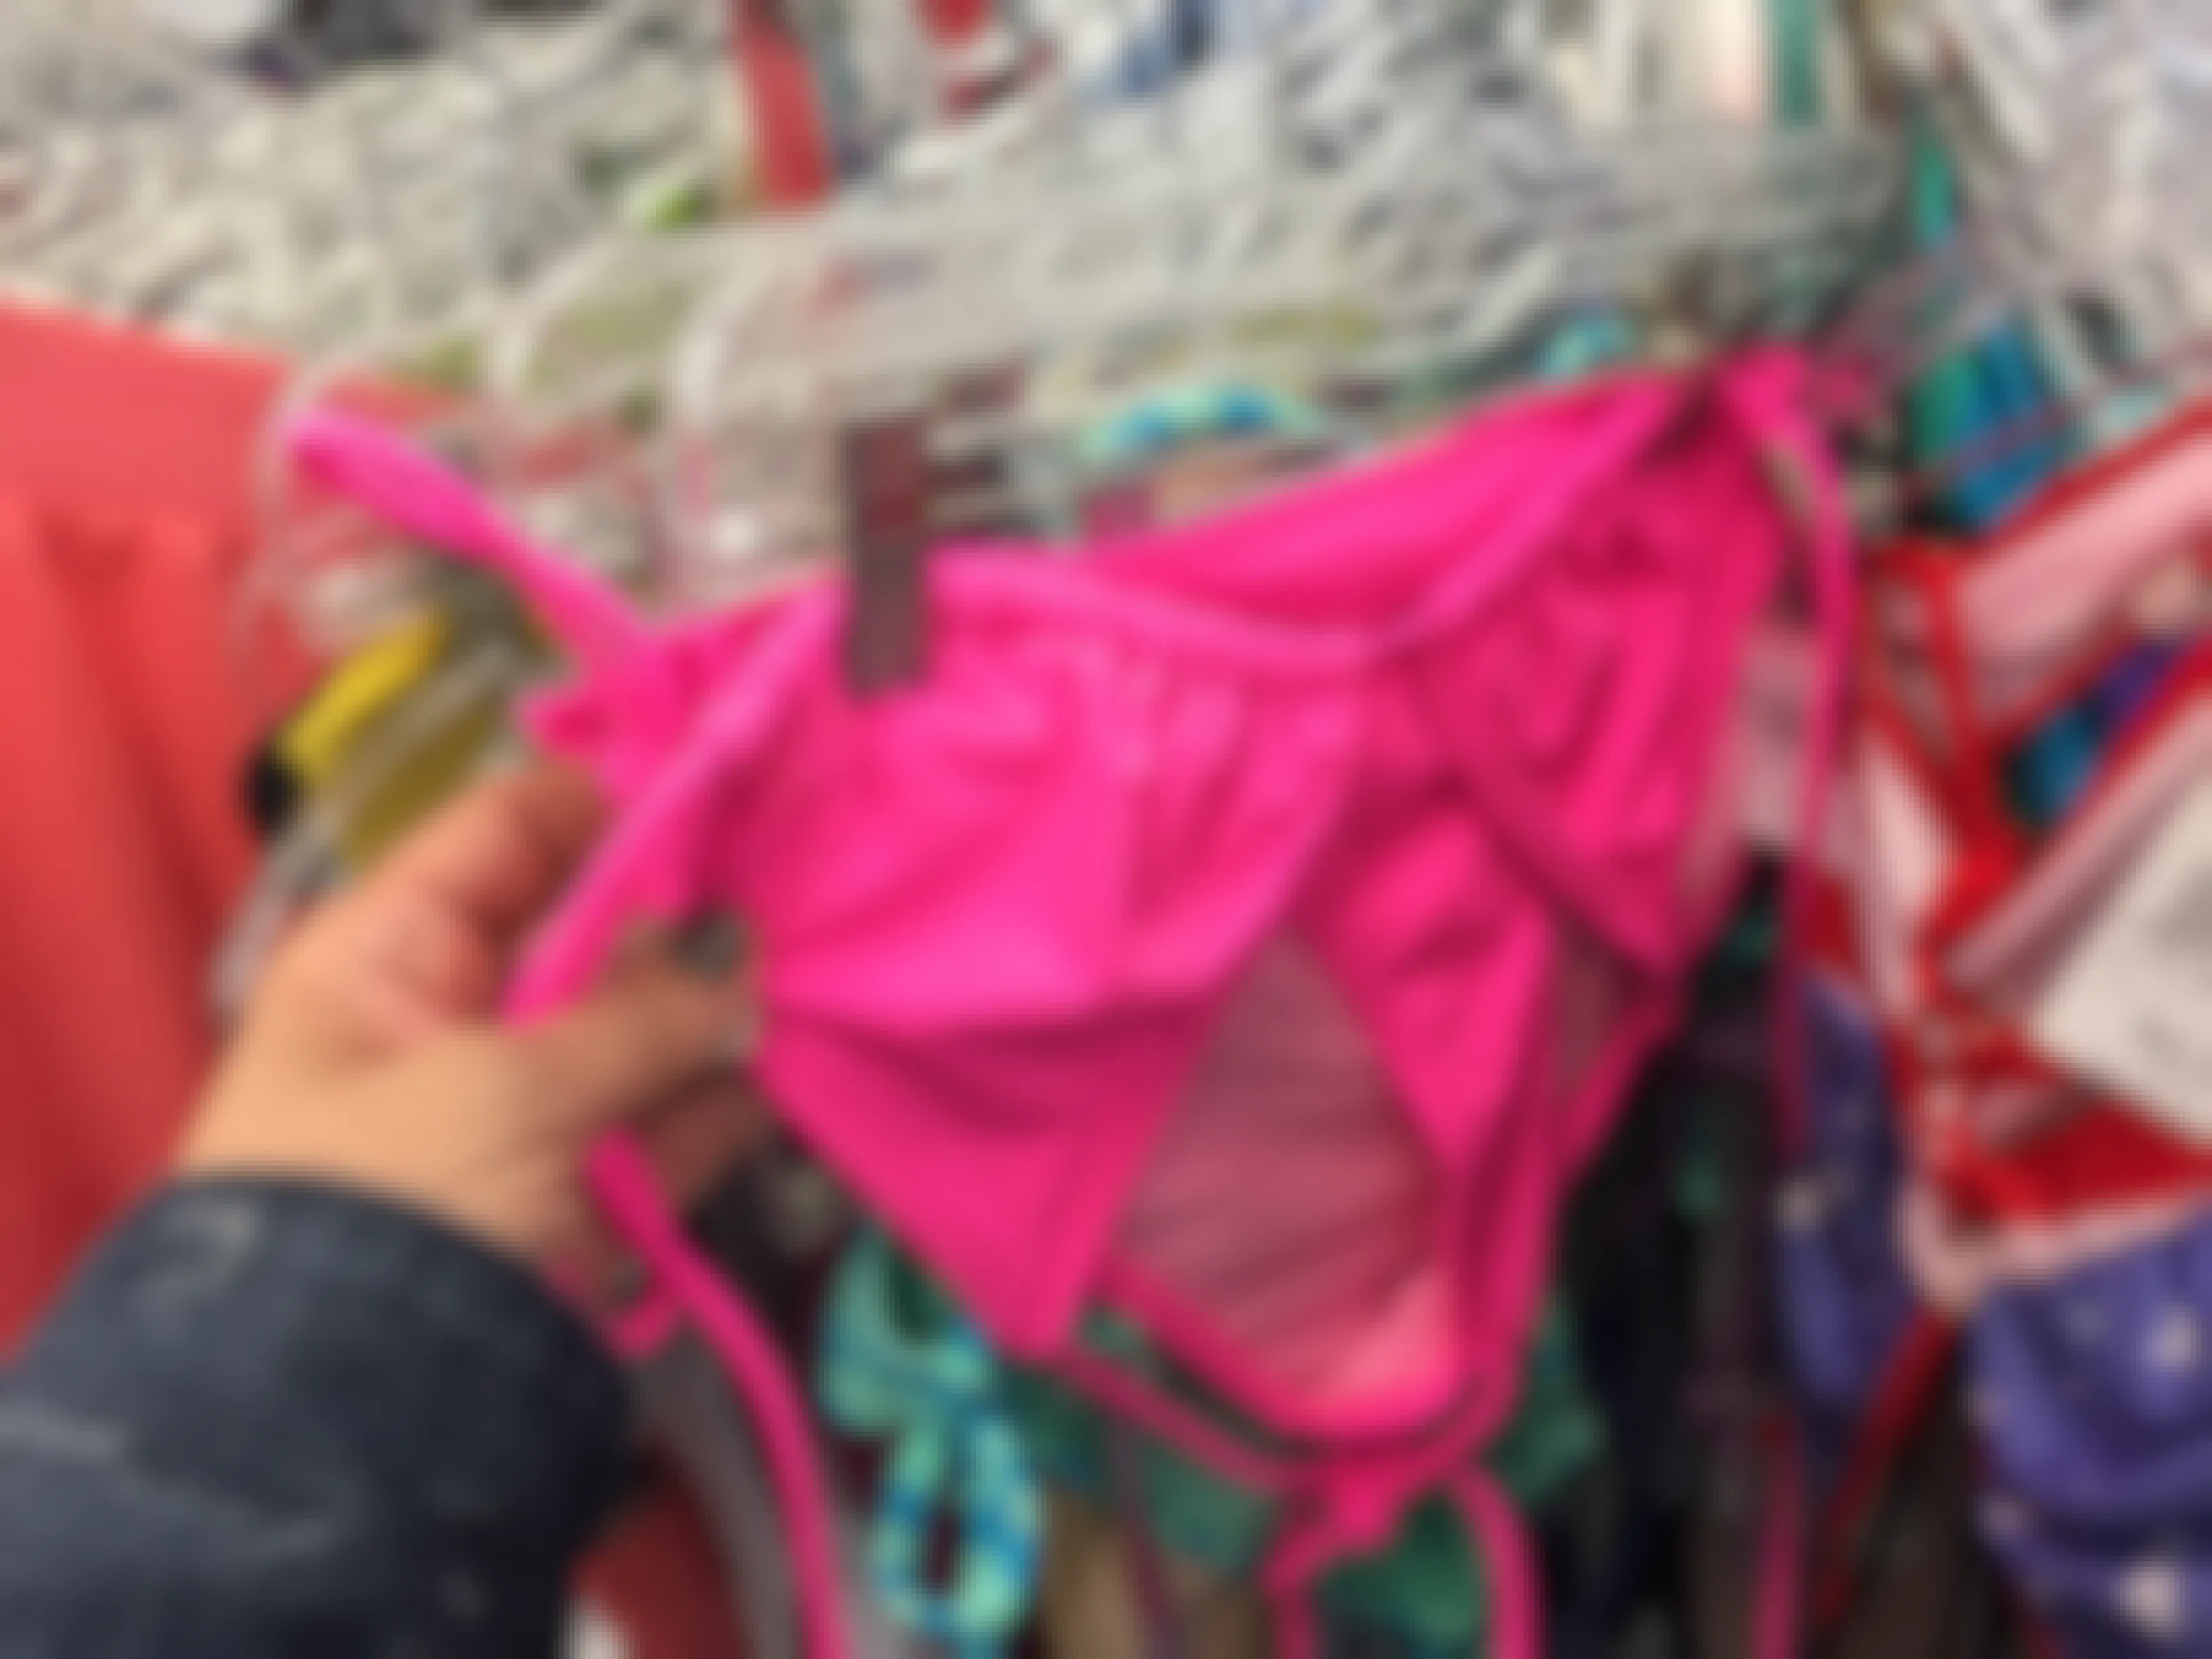 A person looking at a swimsuit on a rack at Goodwill